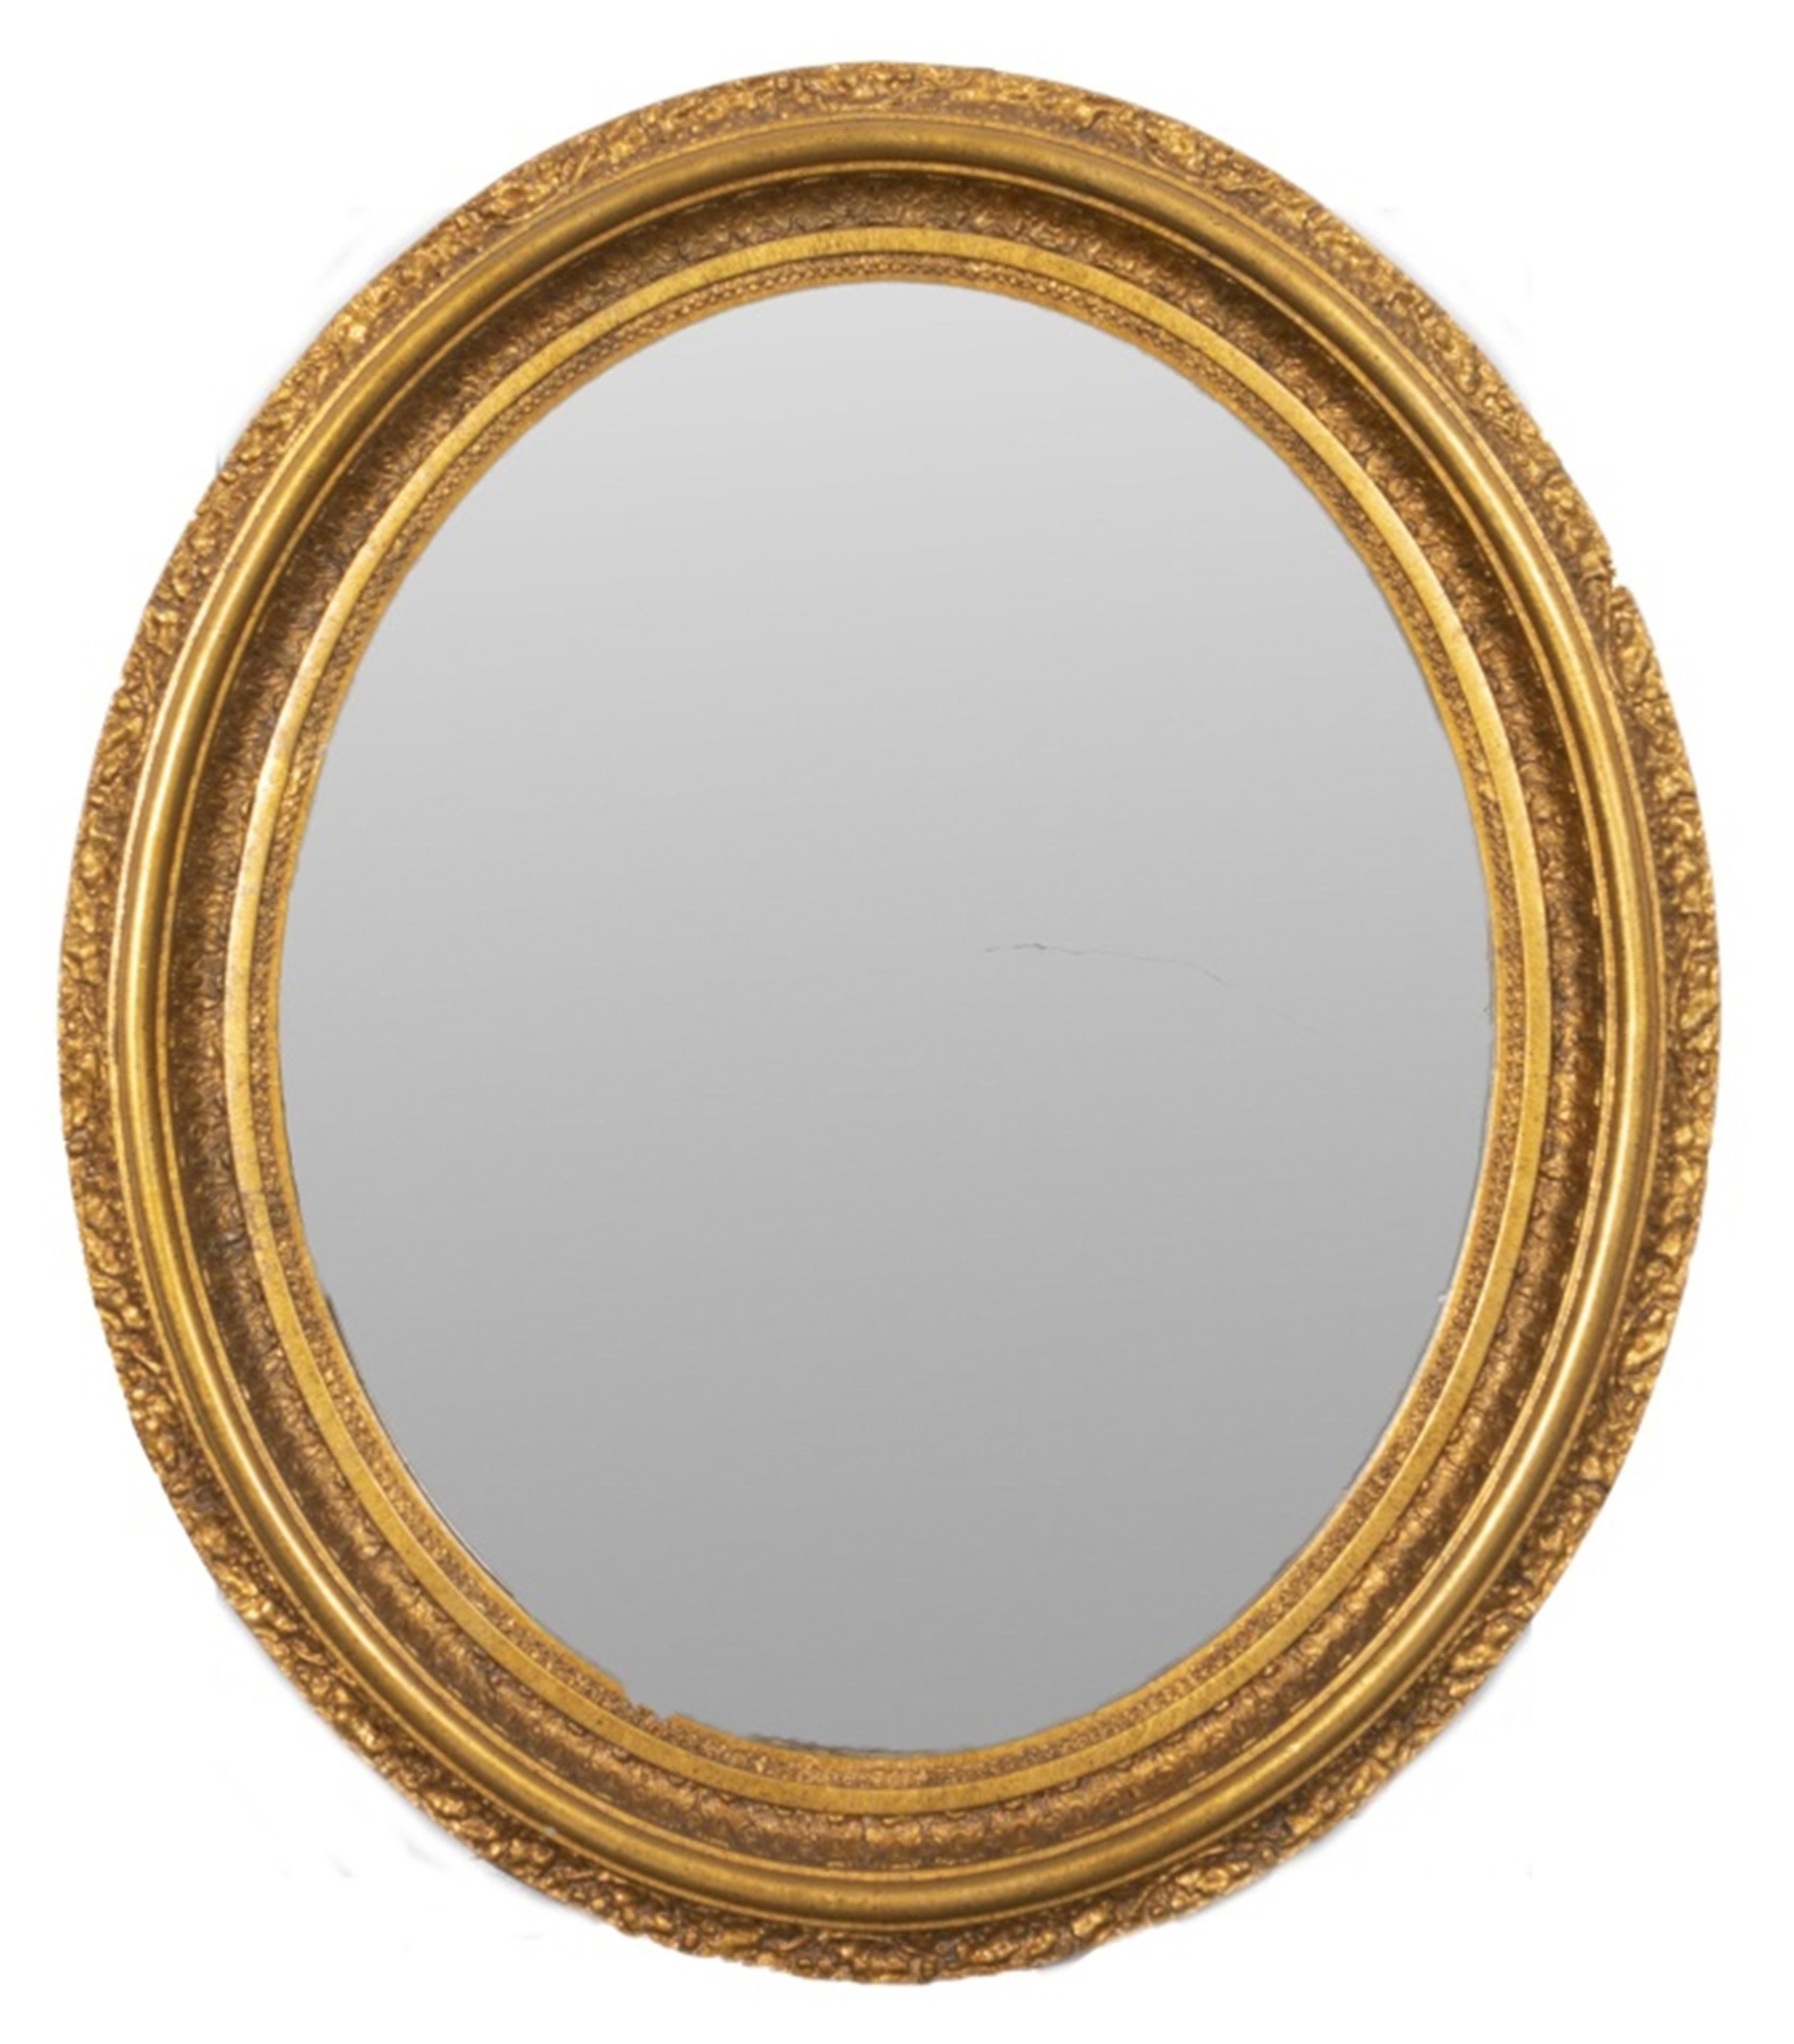 20th Century Rococo Revival Oval Giltwood Mirror For Sale